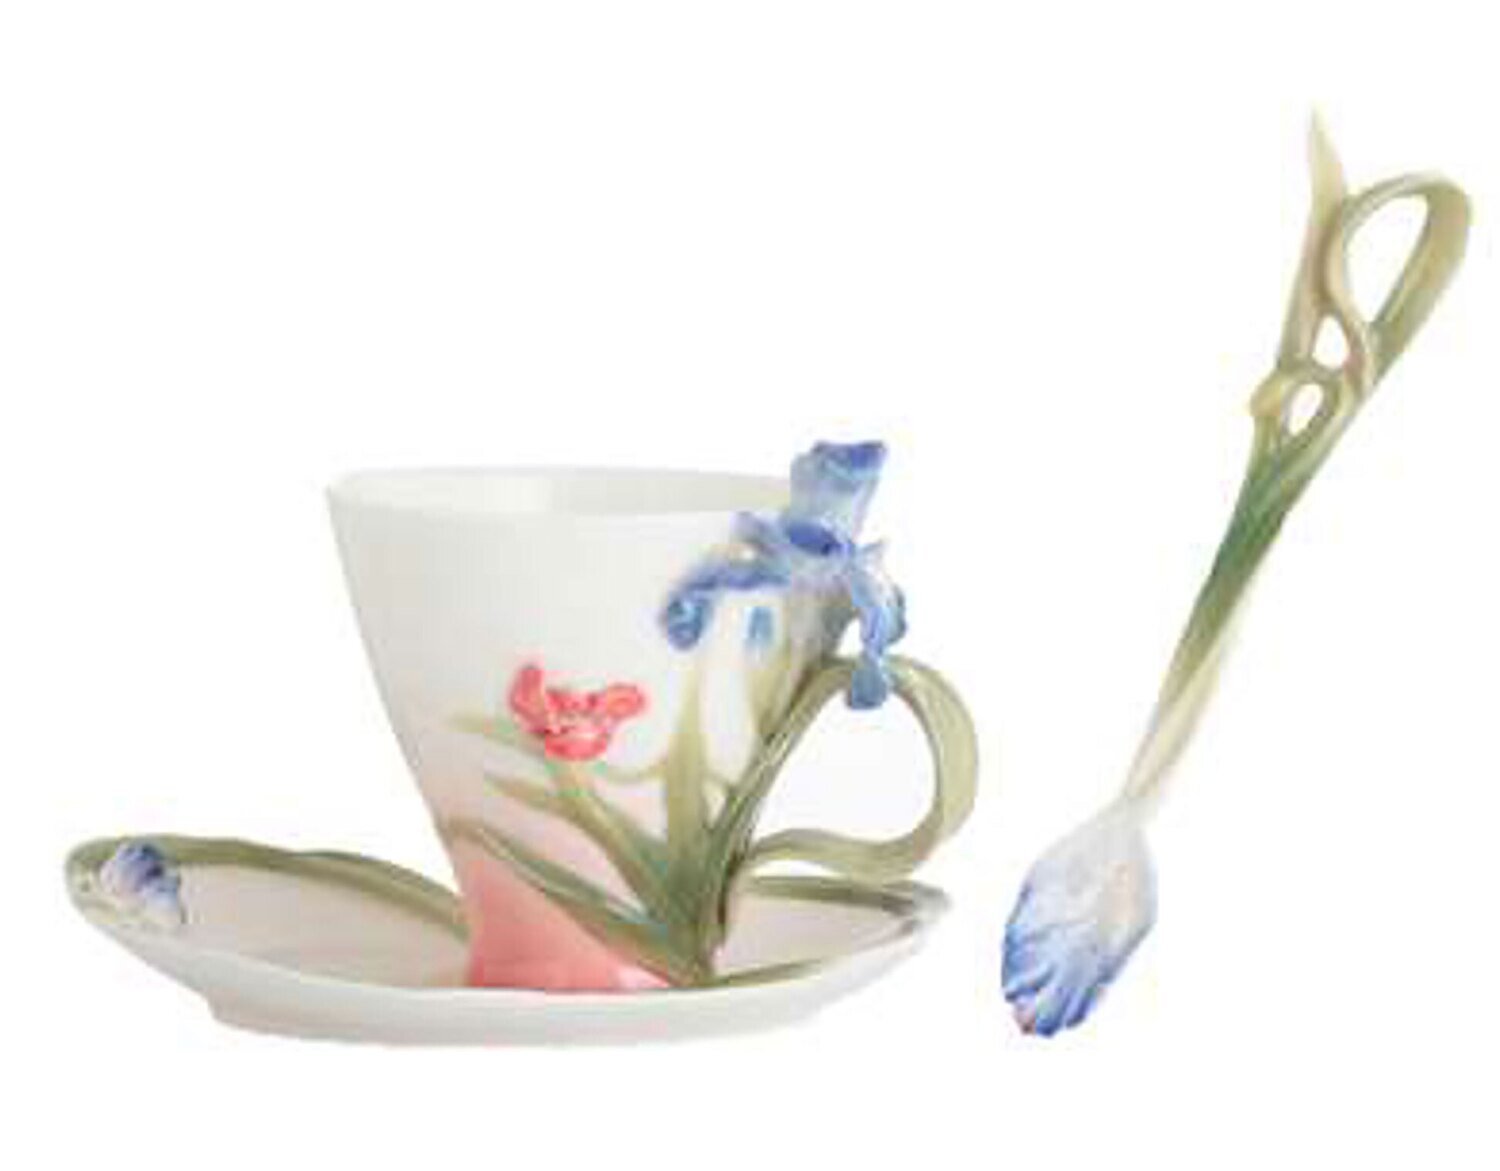 Franz Porcelain Porcelain Fringed Iris and Red Poppy Cup Saucer Spoon Set FZ01170